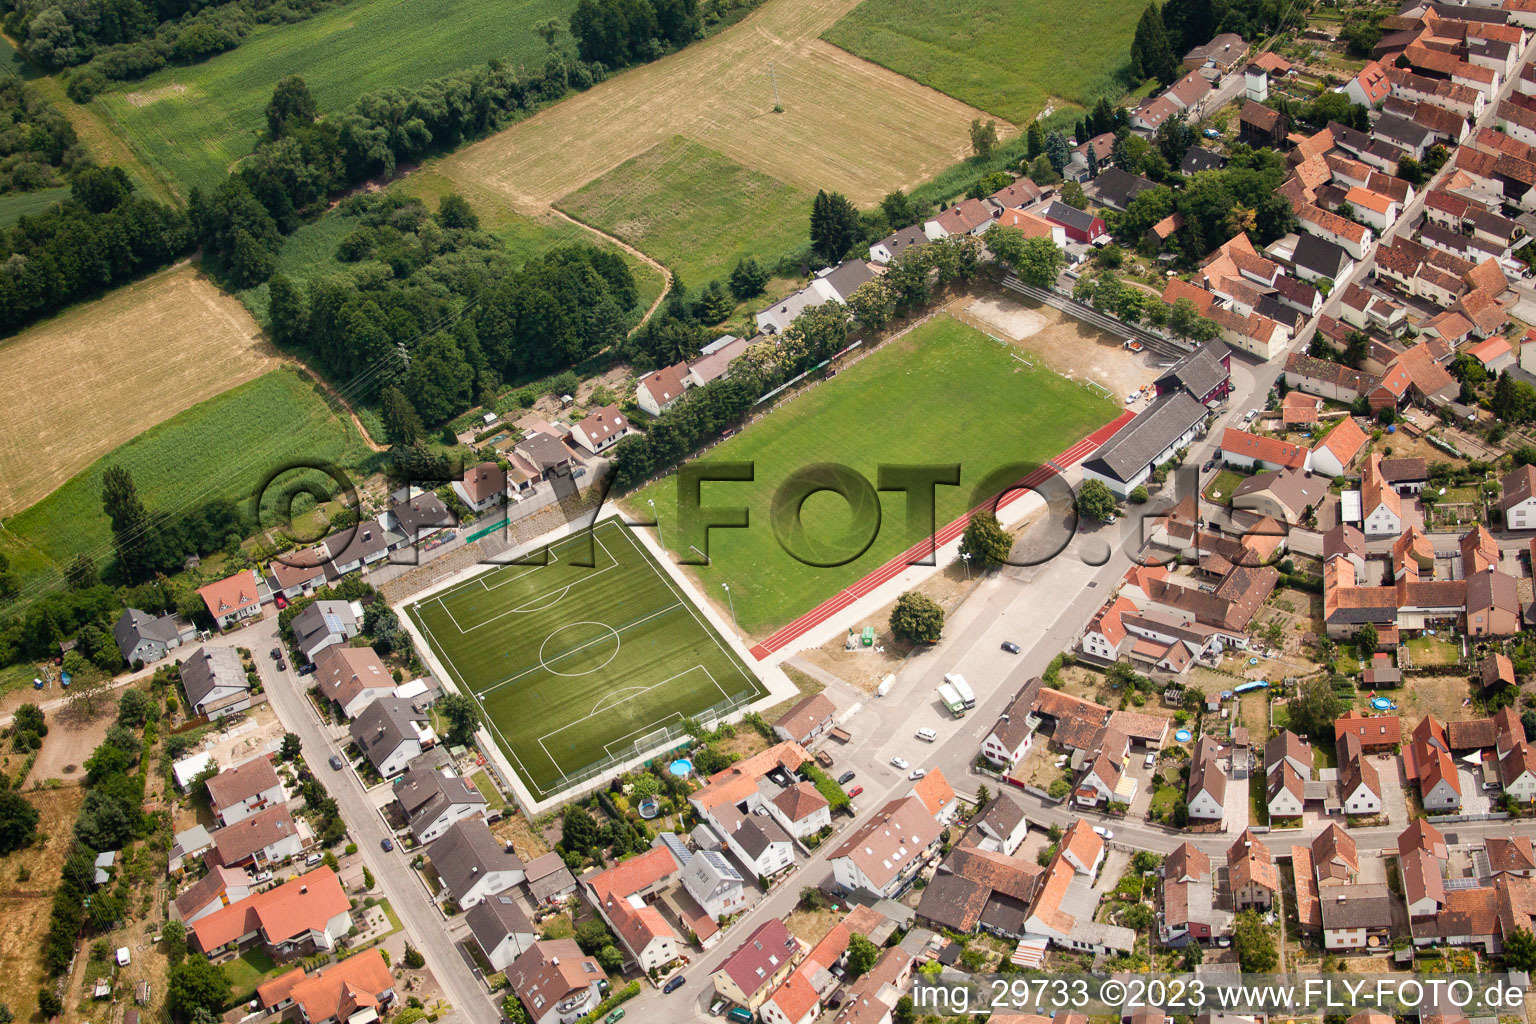 Aerial view of Football field in Jockgrim in the state Rhineland-Palatinate, Germany